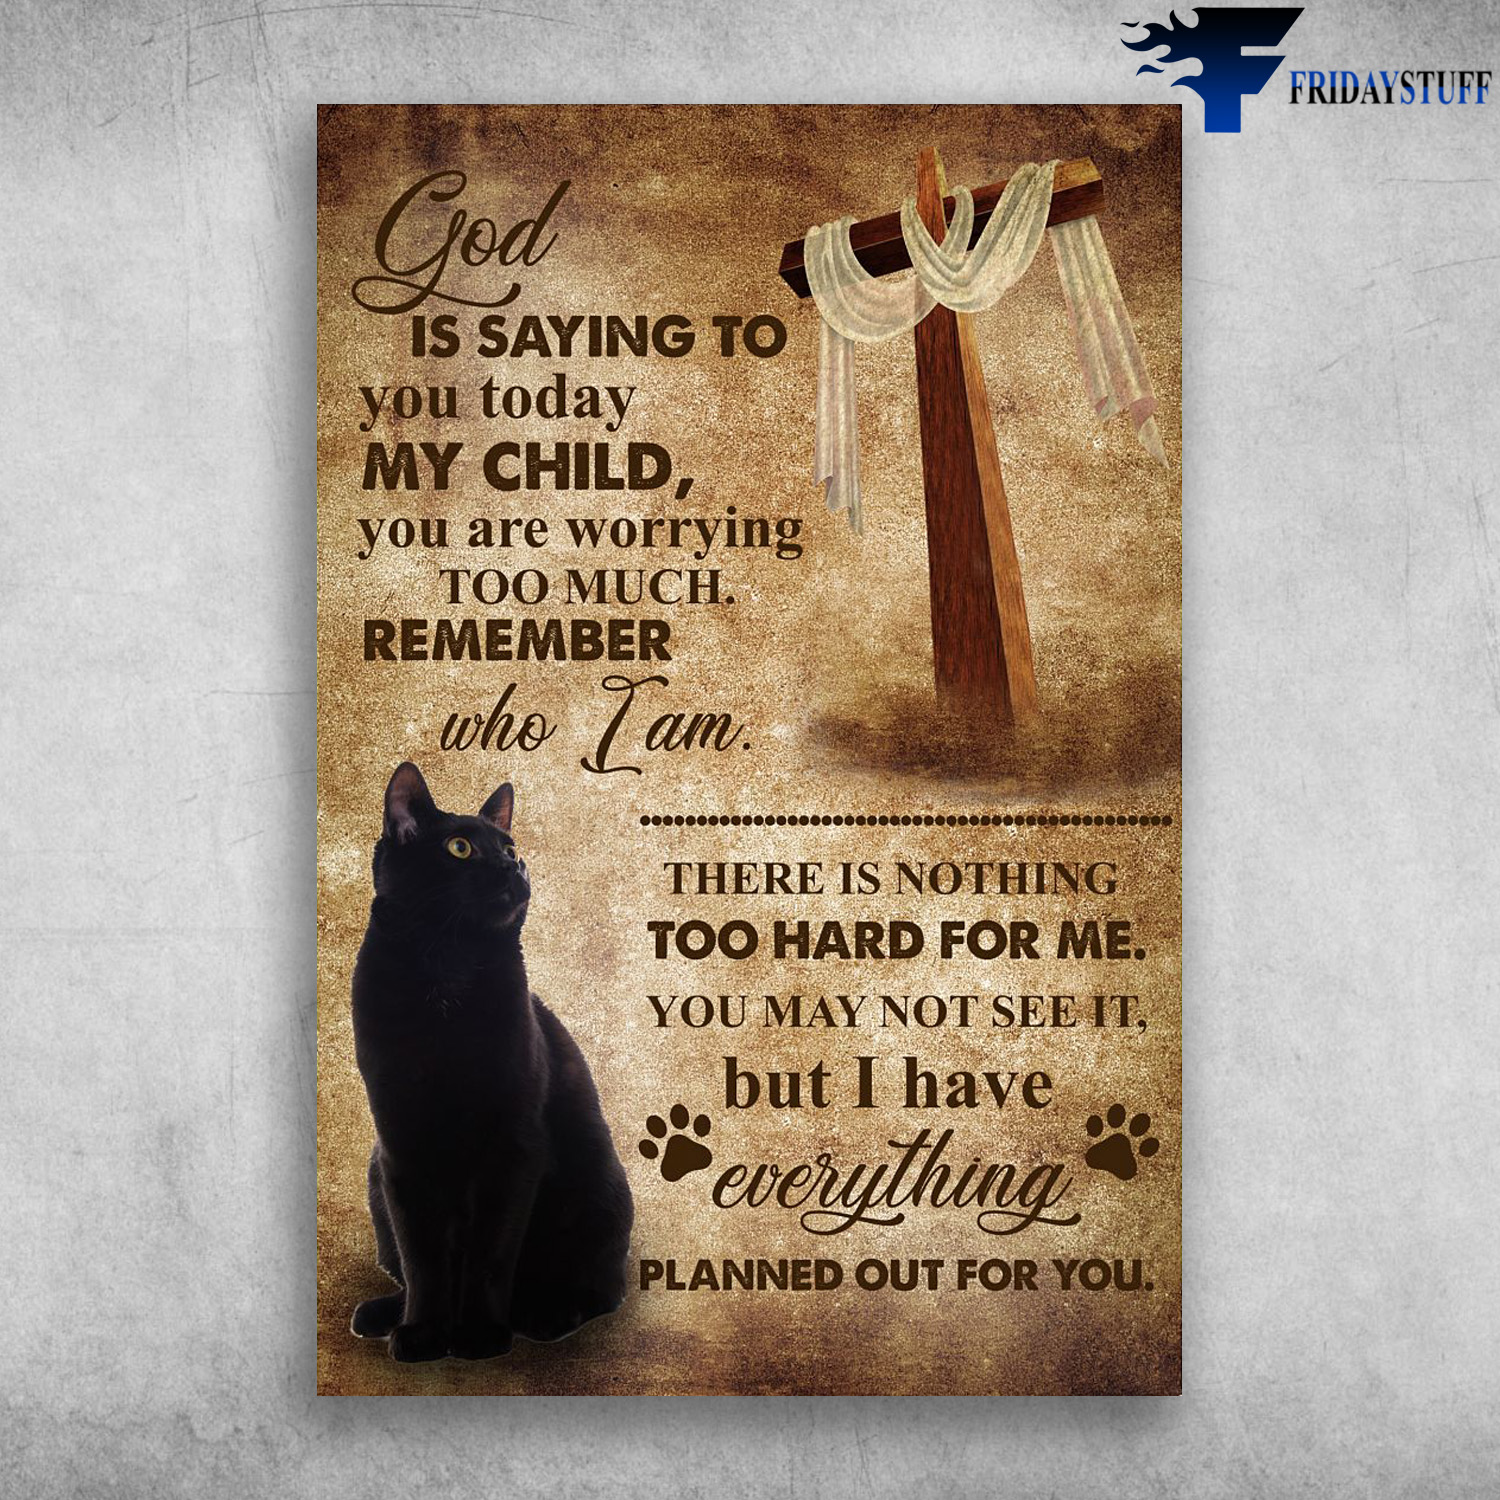 Black Cat And The Cross - God Is Saying To You Today My Child, You Are Worring Too Much, Remember Who I Am, There Is Nothing Too Hard For Me, You May Not See It, But I Have Everything Planned Out For You